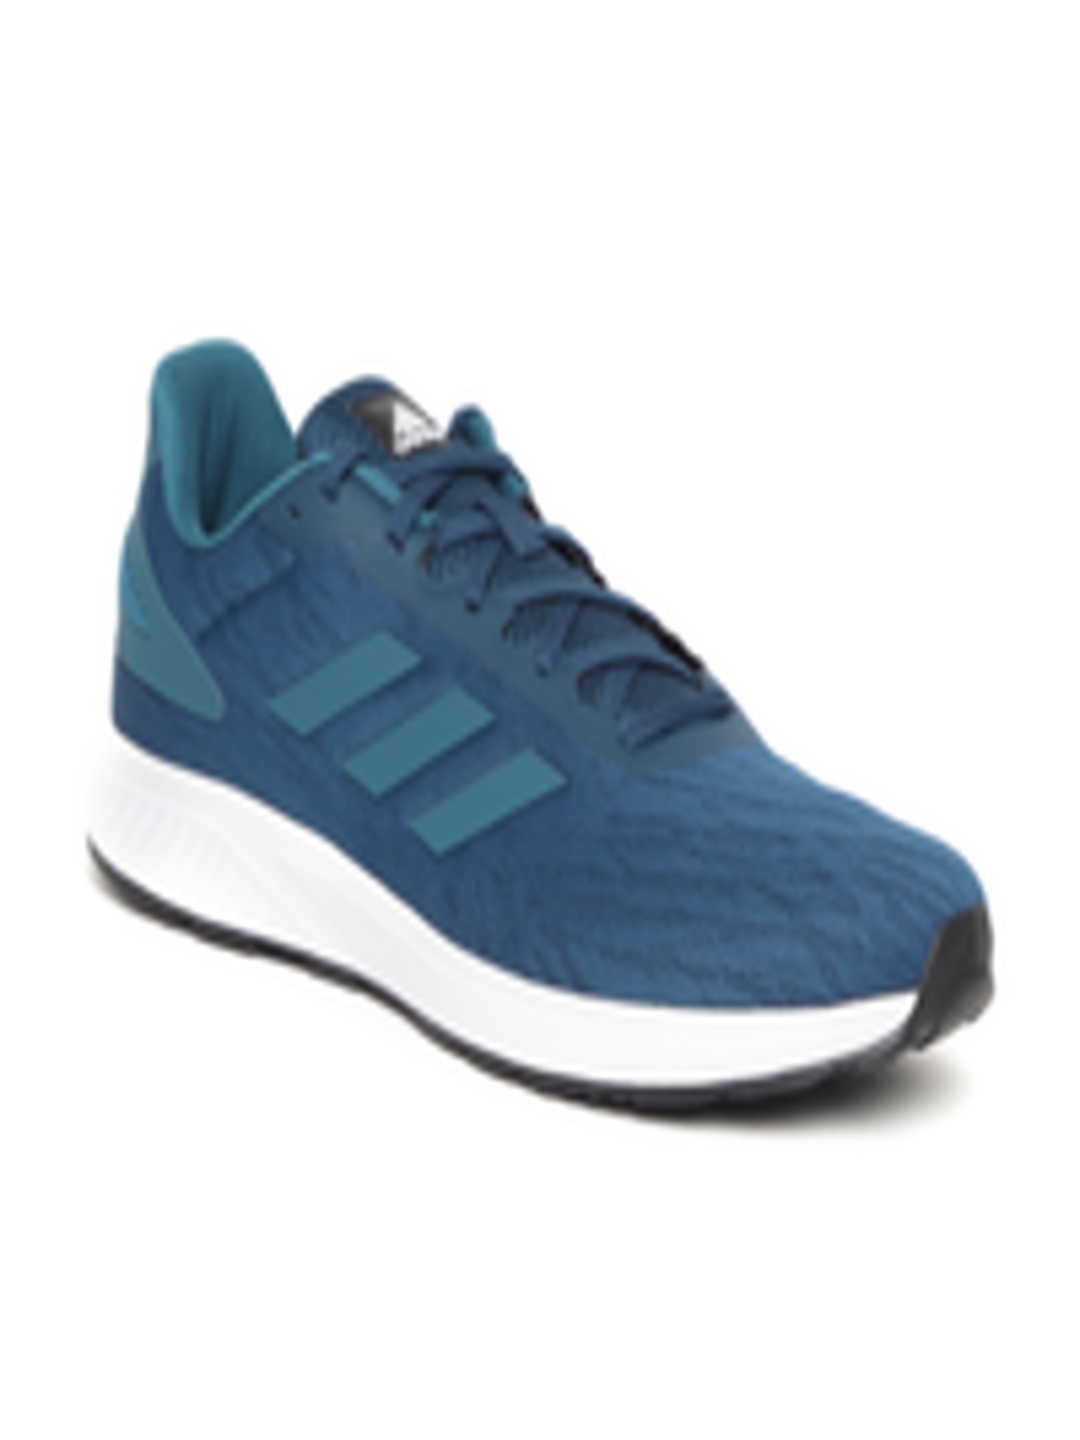 Buy ADIDAS Men Teal Blue KALUS Running Shoes - Sports Shoes for Men ...